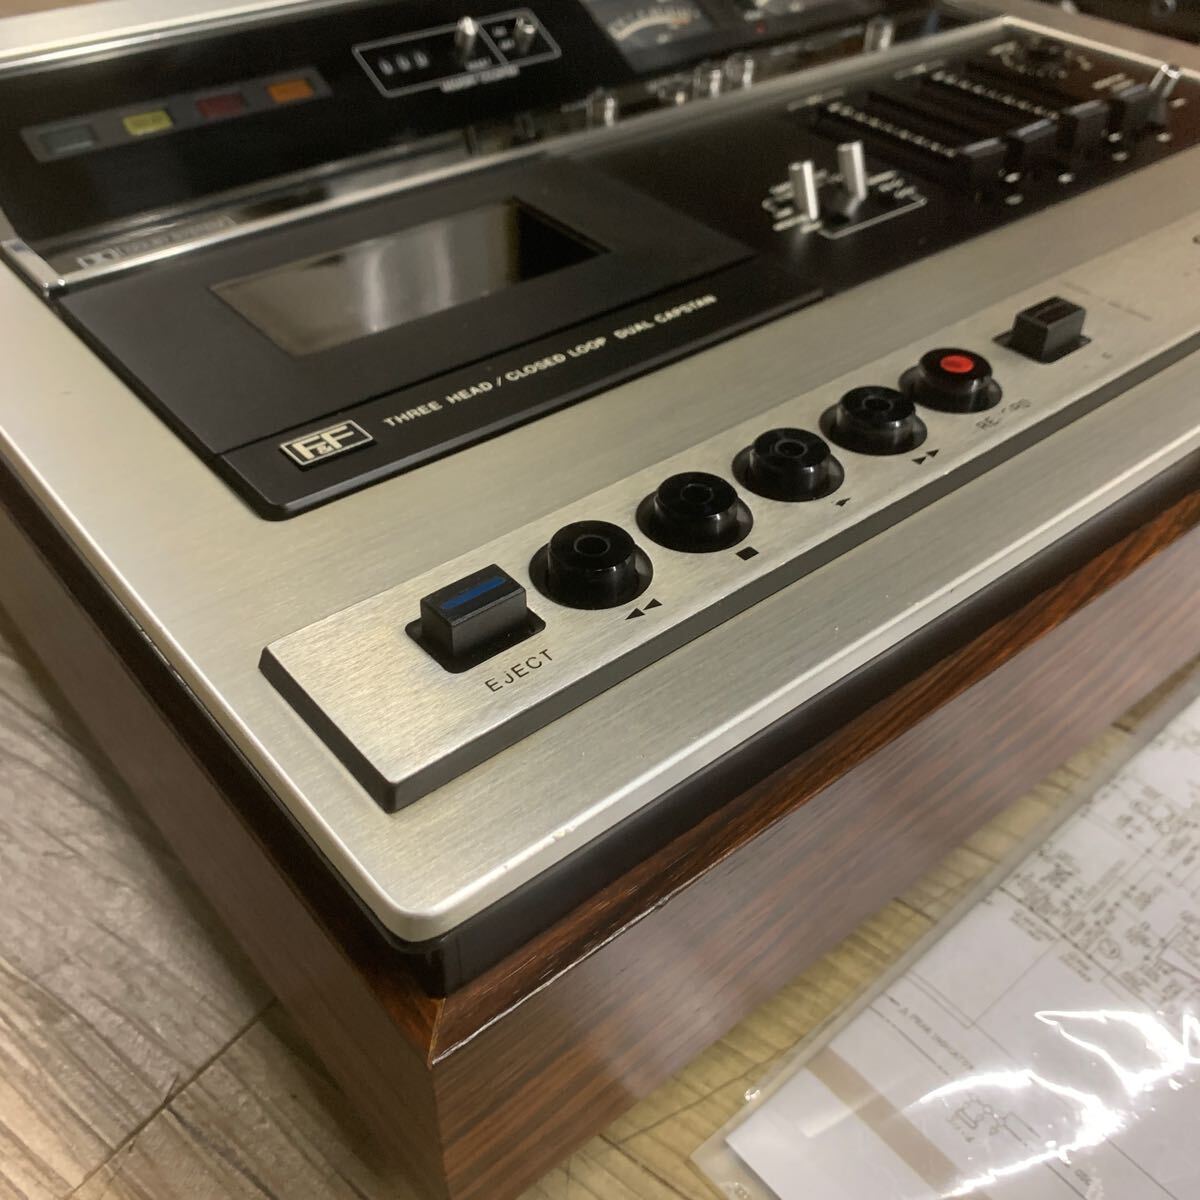  working properly goods SONY Sony cassette deck TC-6150SD ultimate beautiful goods 60Hz for pulley attaching rare Showa Retro 